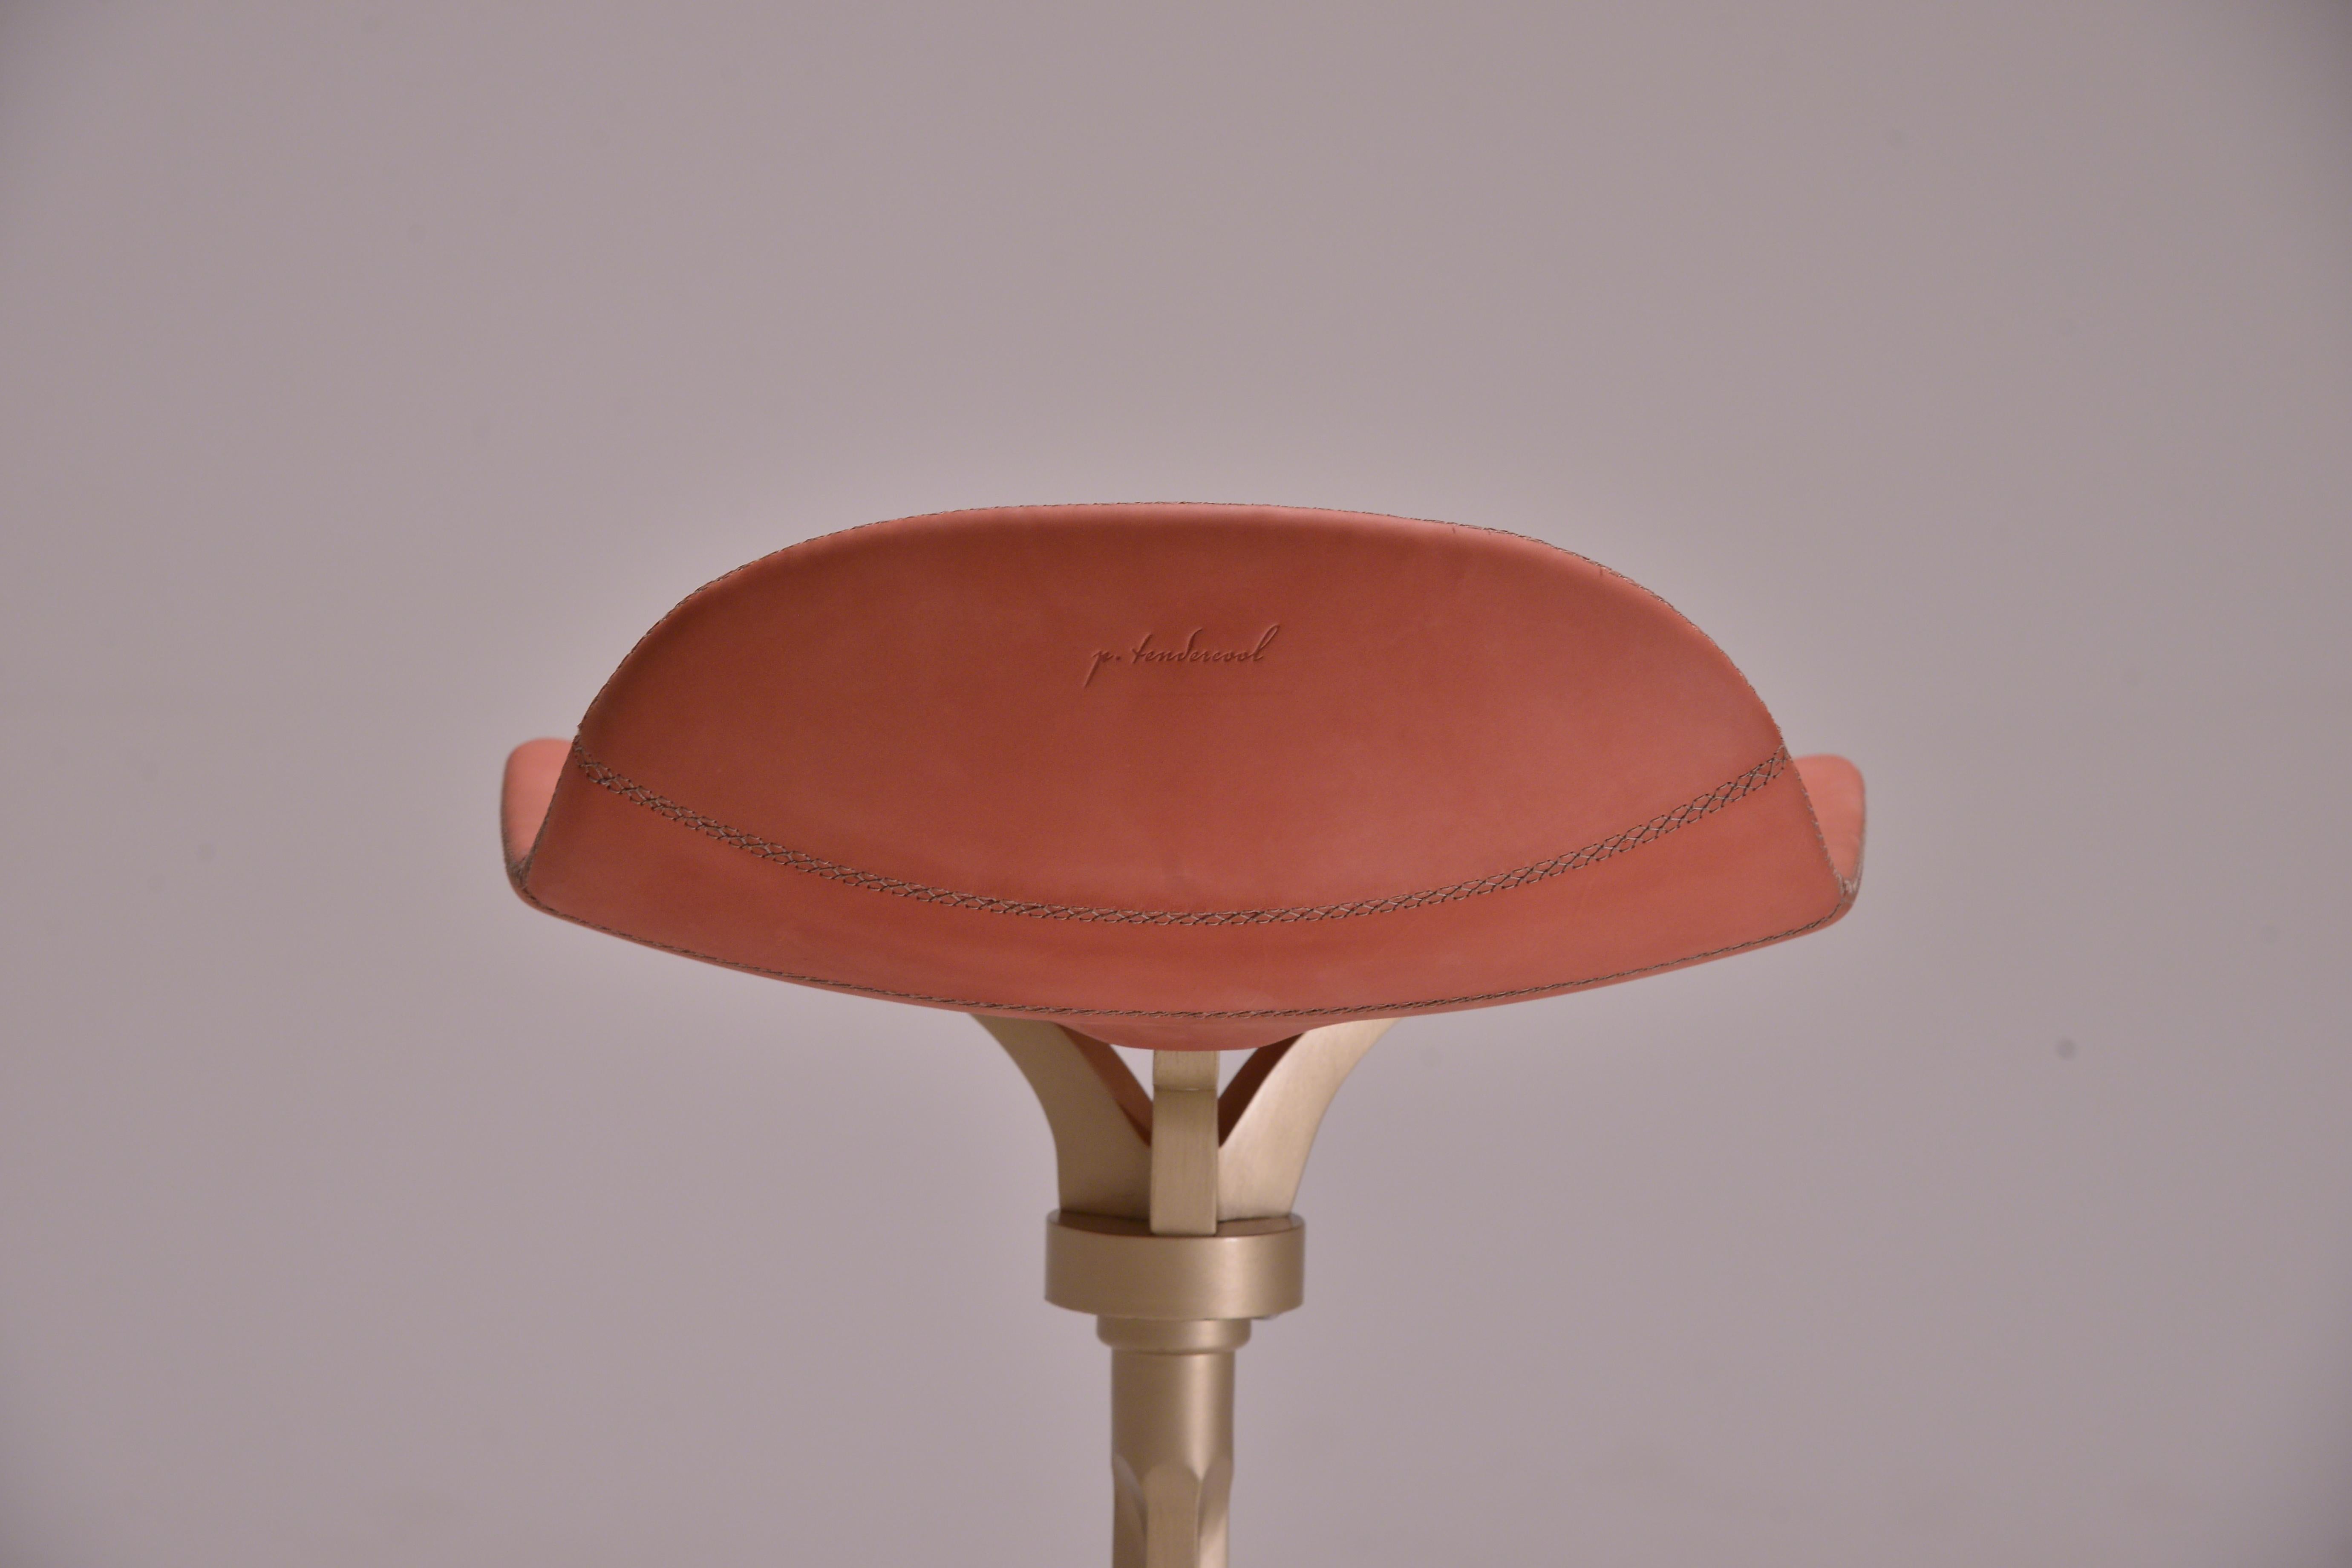 Model: PT481 Counter-height stool + swivel + ring
Seat: leather
Seat color: Vieux Rose (Pink)
Base: PT481 sand cast brass
Base finish: Golden sand
Dimensions: W 55 x D 52 x H 80  Seat H 67 cm
W 21.65 x D 20.27 x H 31.49  Seat H 26.38 in

Handmade,